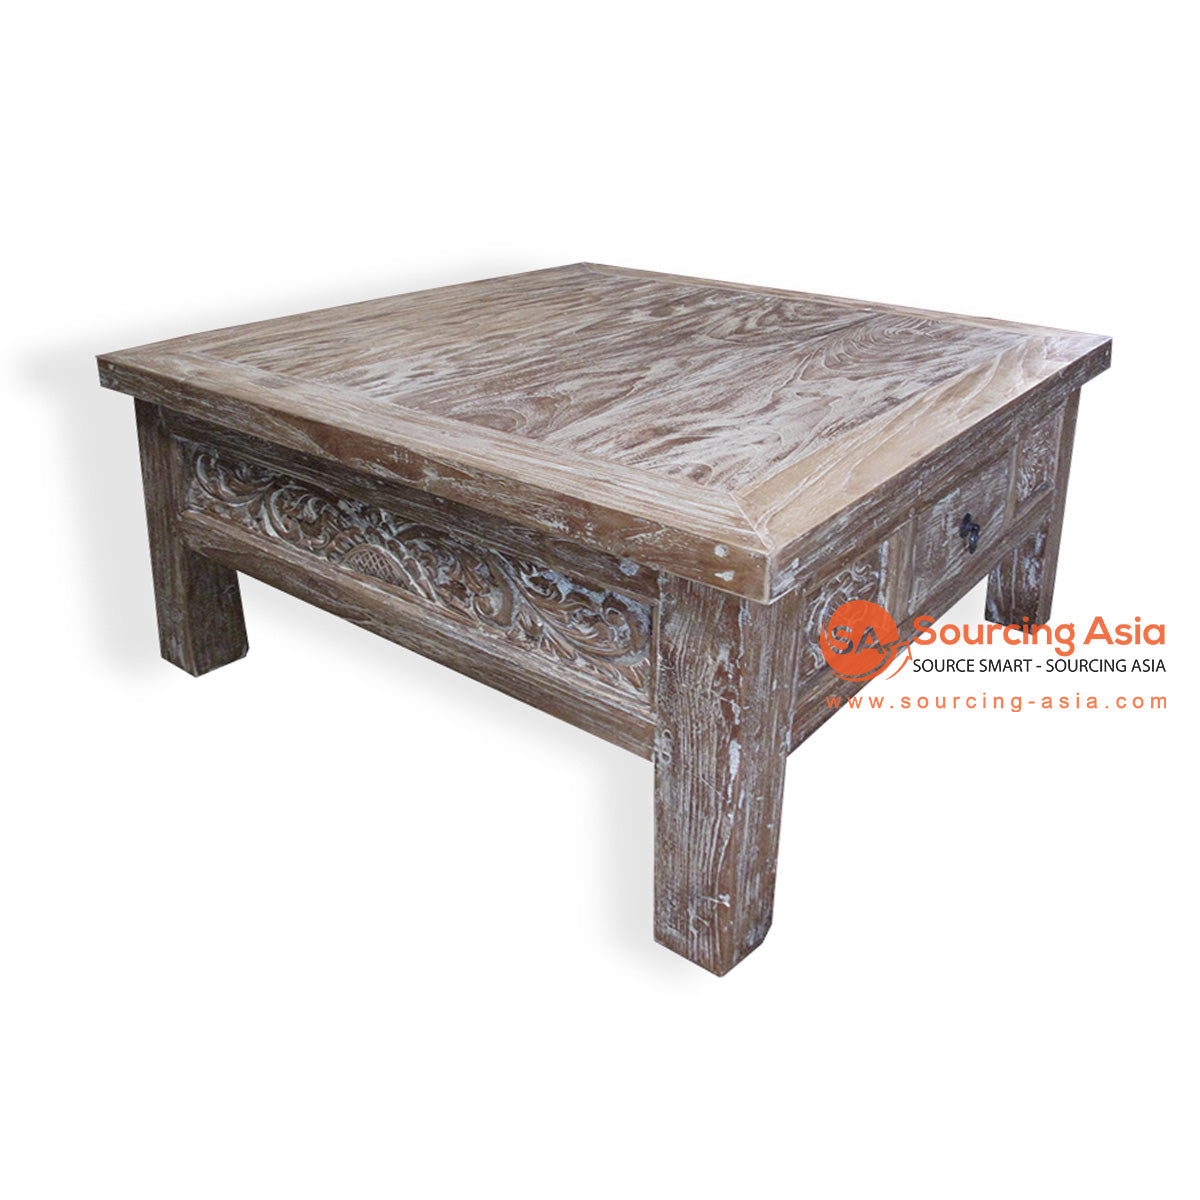 LAC048 WHITE WASH RECYCLED TEAK WOOD CARVED COFFEE TABLE